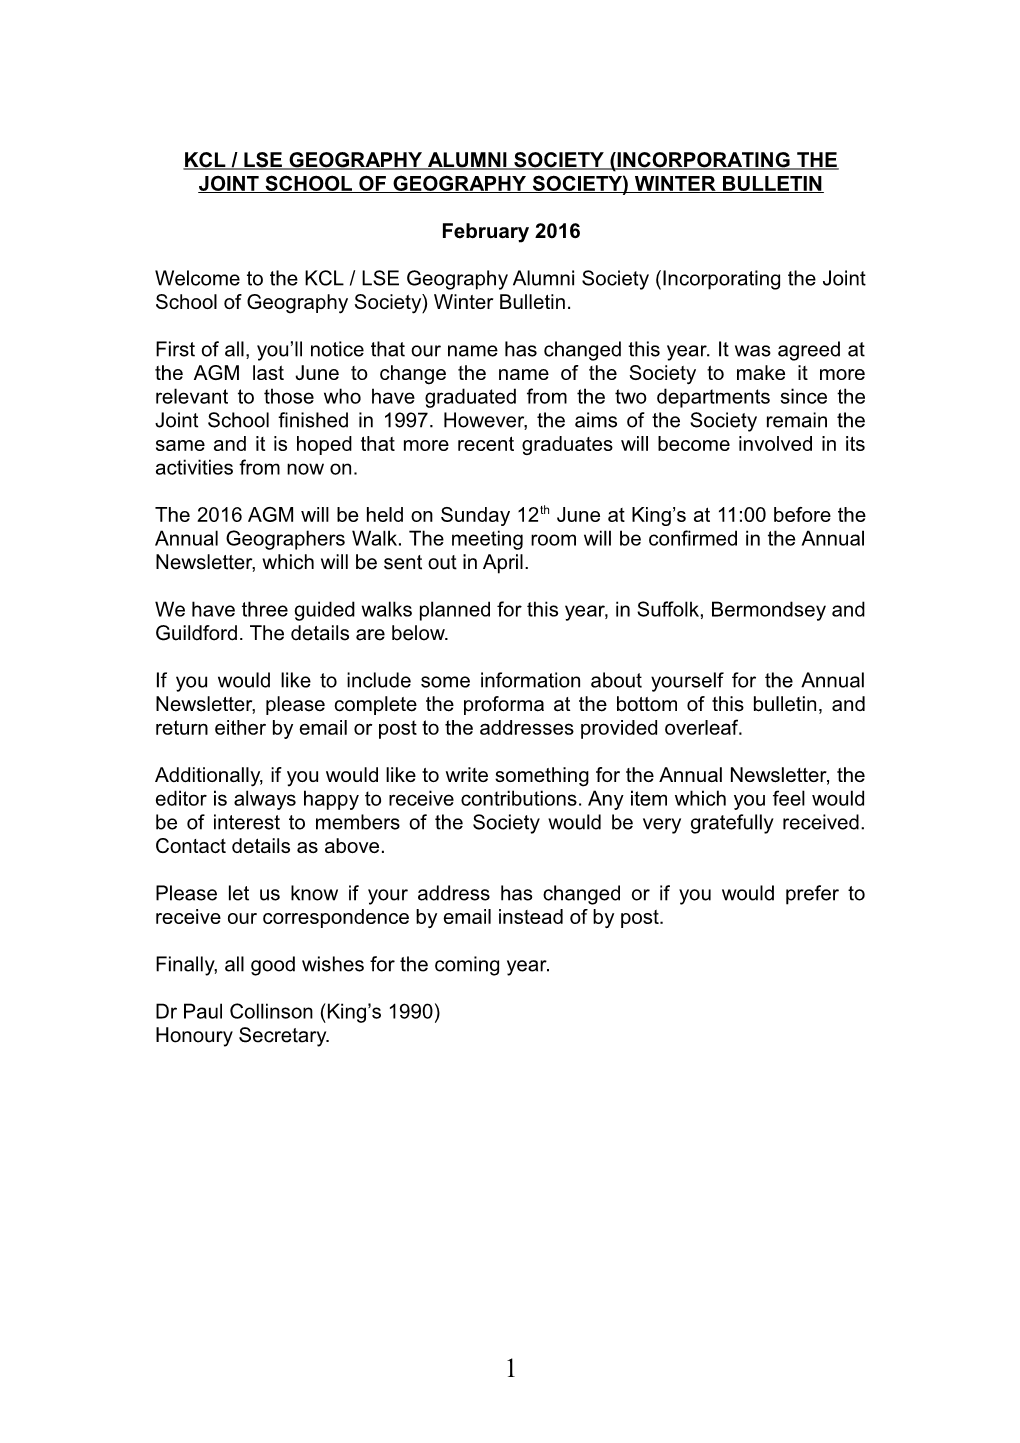 KCL / LSE Joint School Society Geography Newsletter